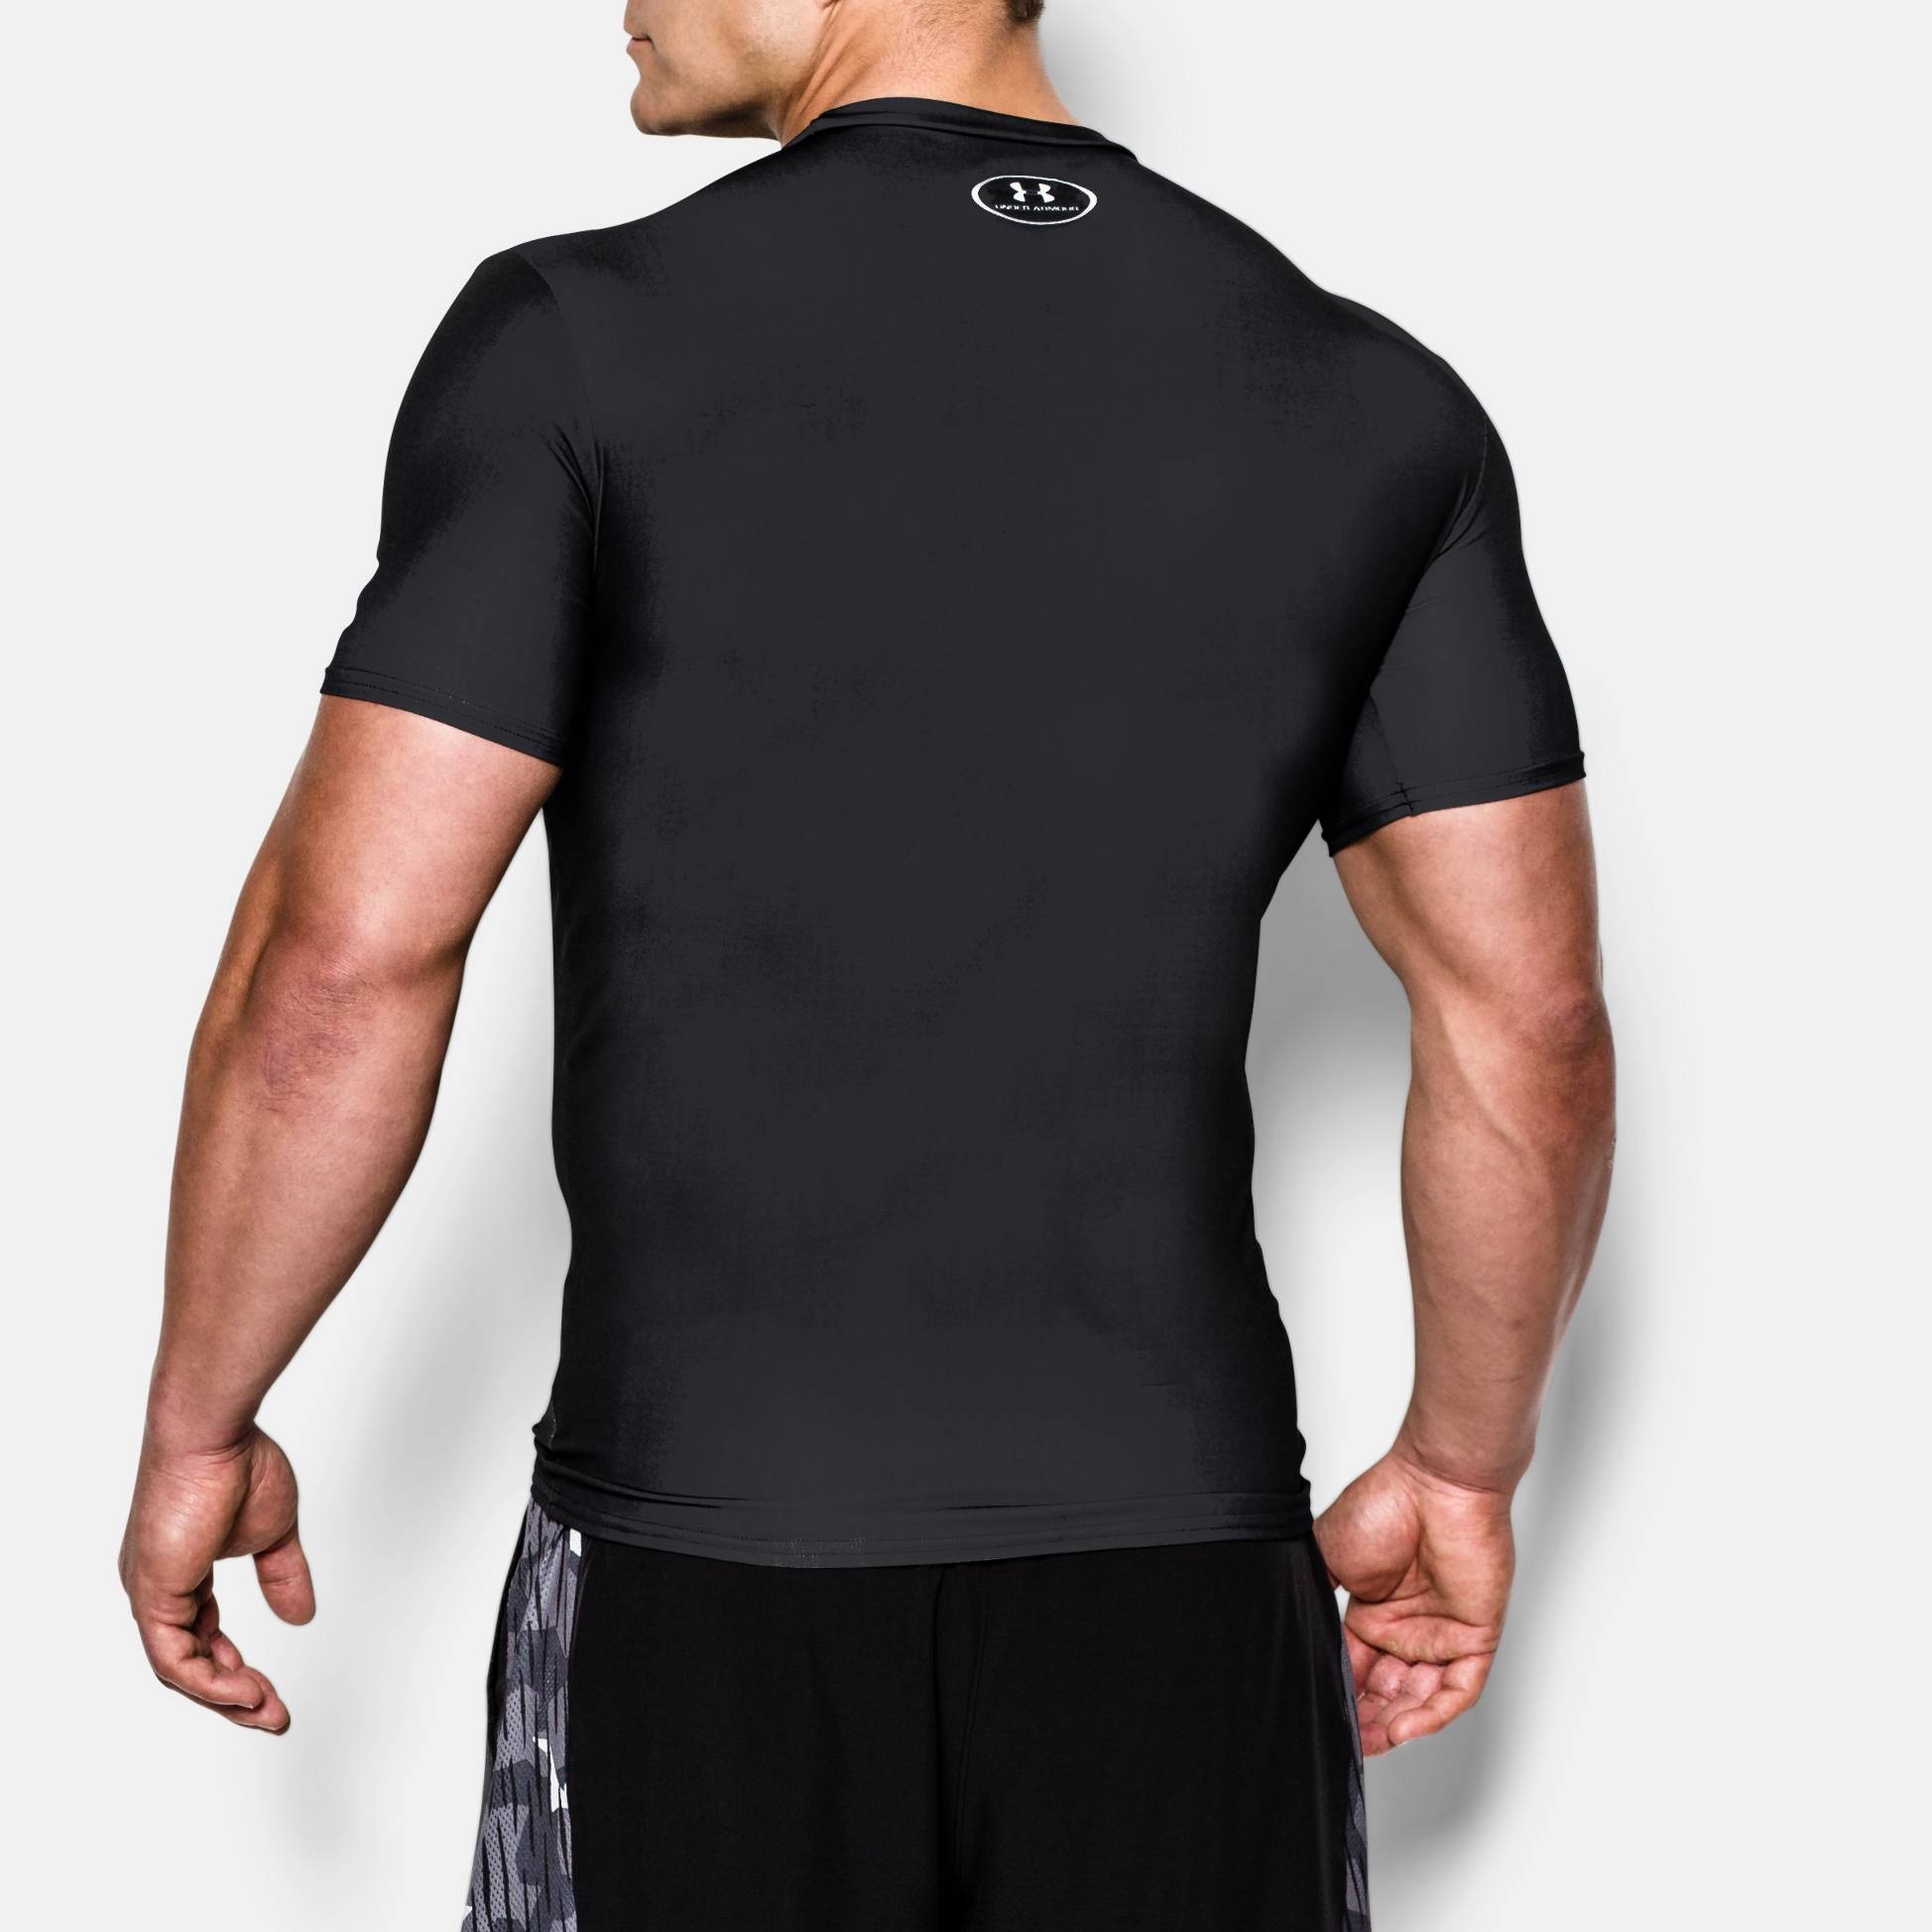 acción Absoluto terraza Clothing | Under armour Alter Ego Punisher Comp. Shi | Fitness